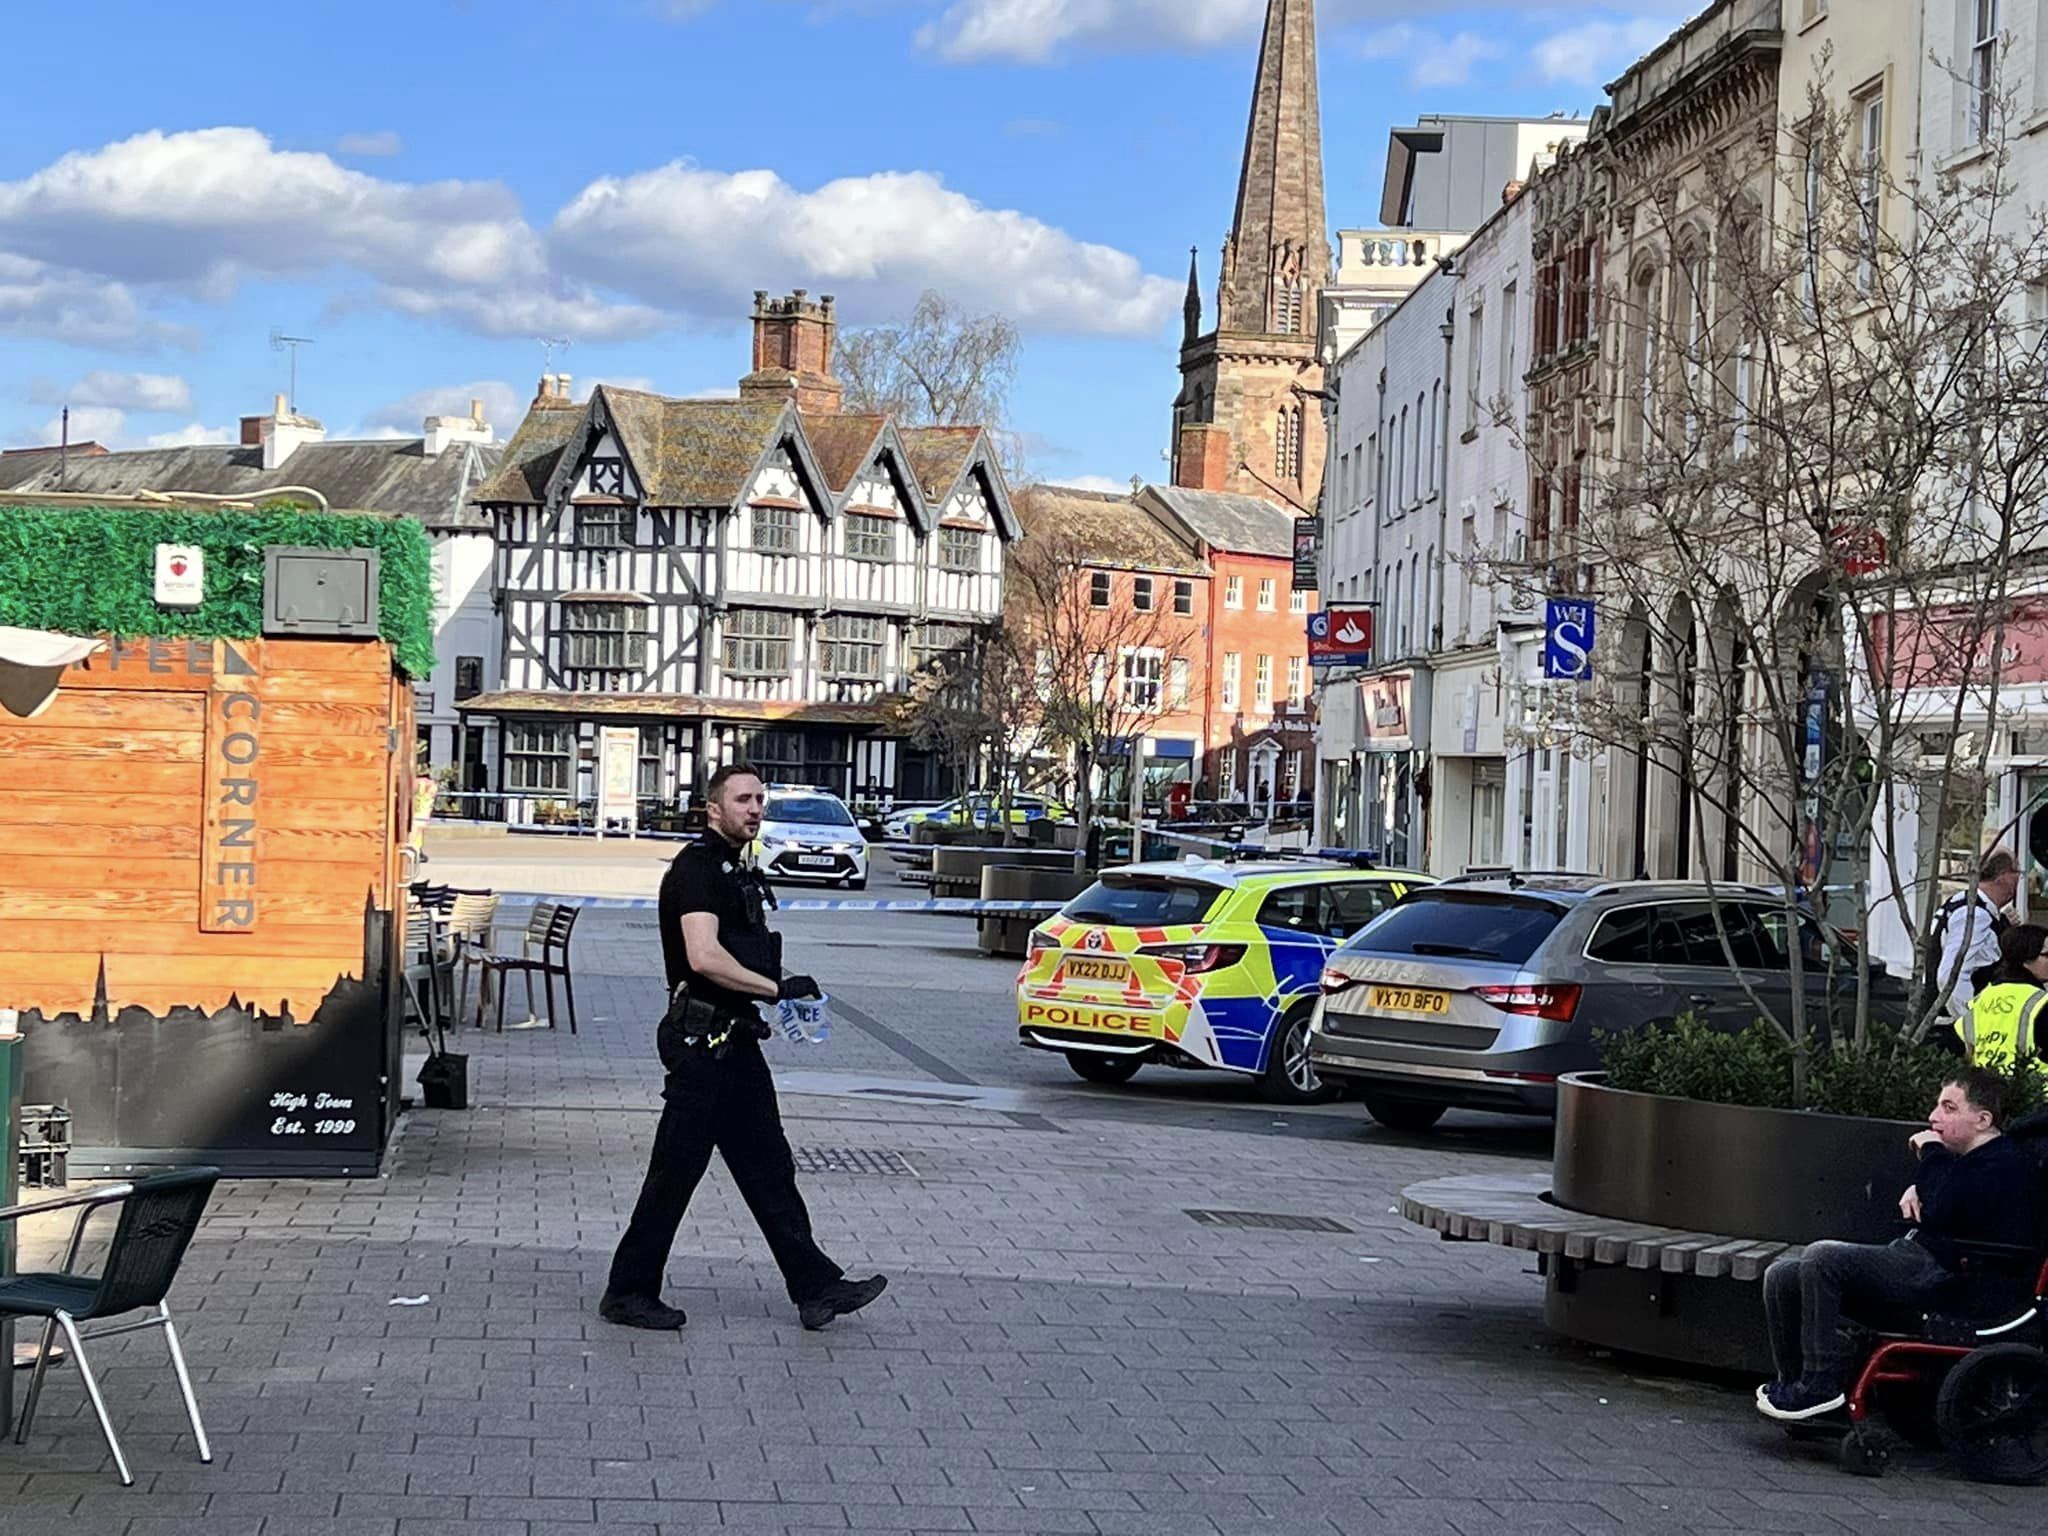 Police in High Town, Hereford, Picture: Ian Jebb